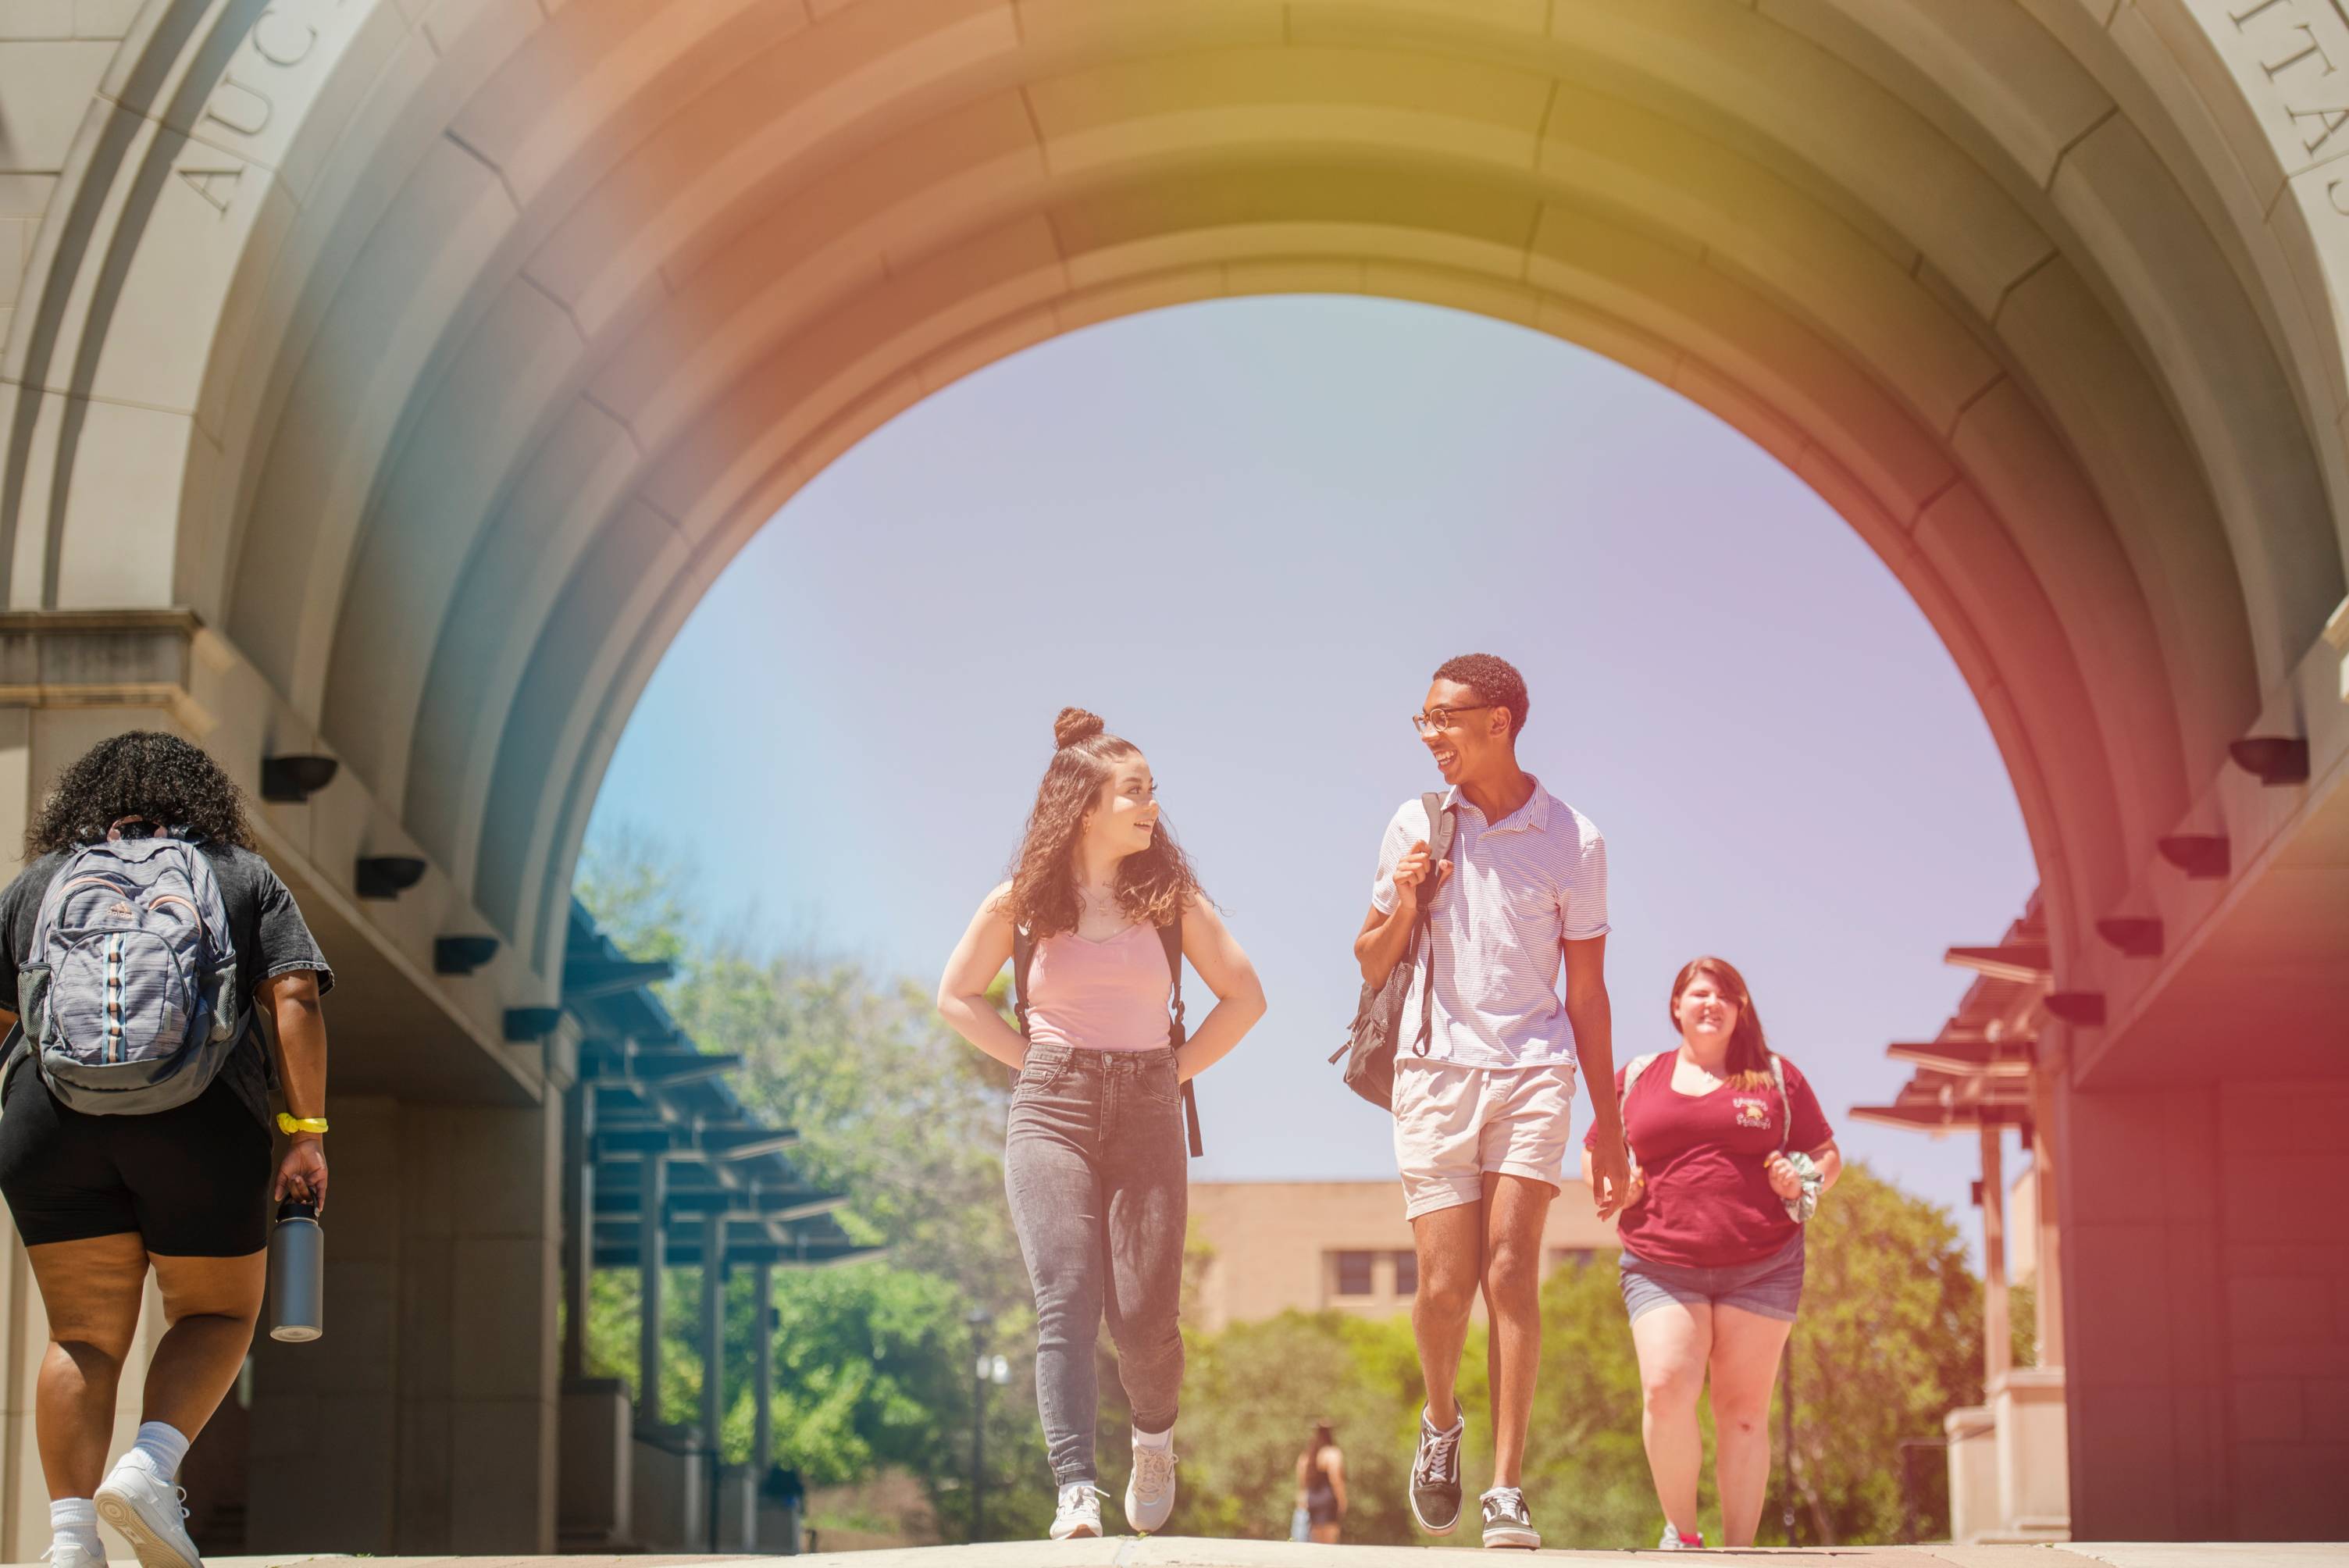 Students under UAC arch walking